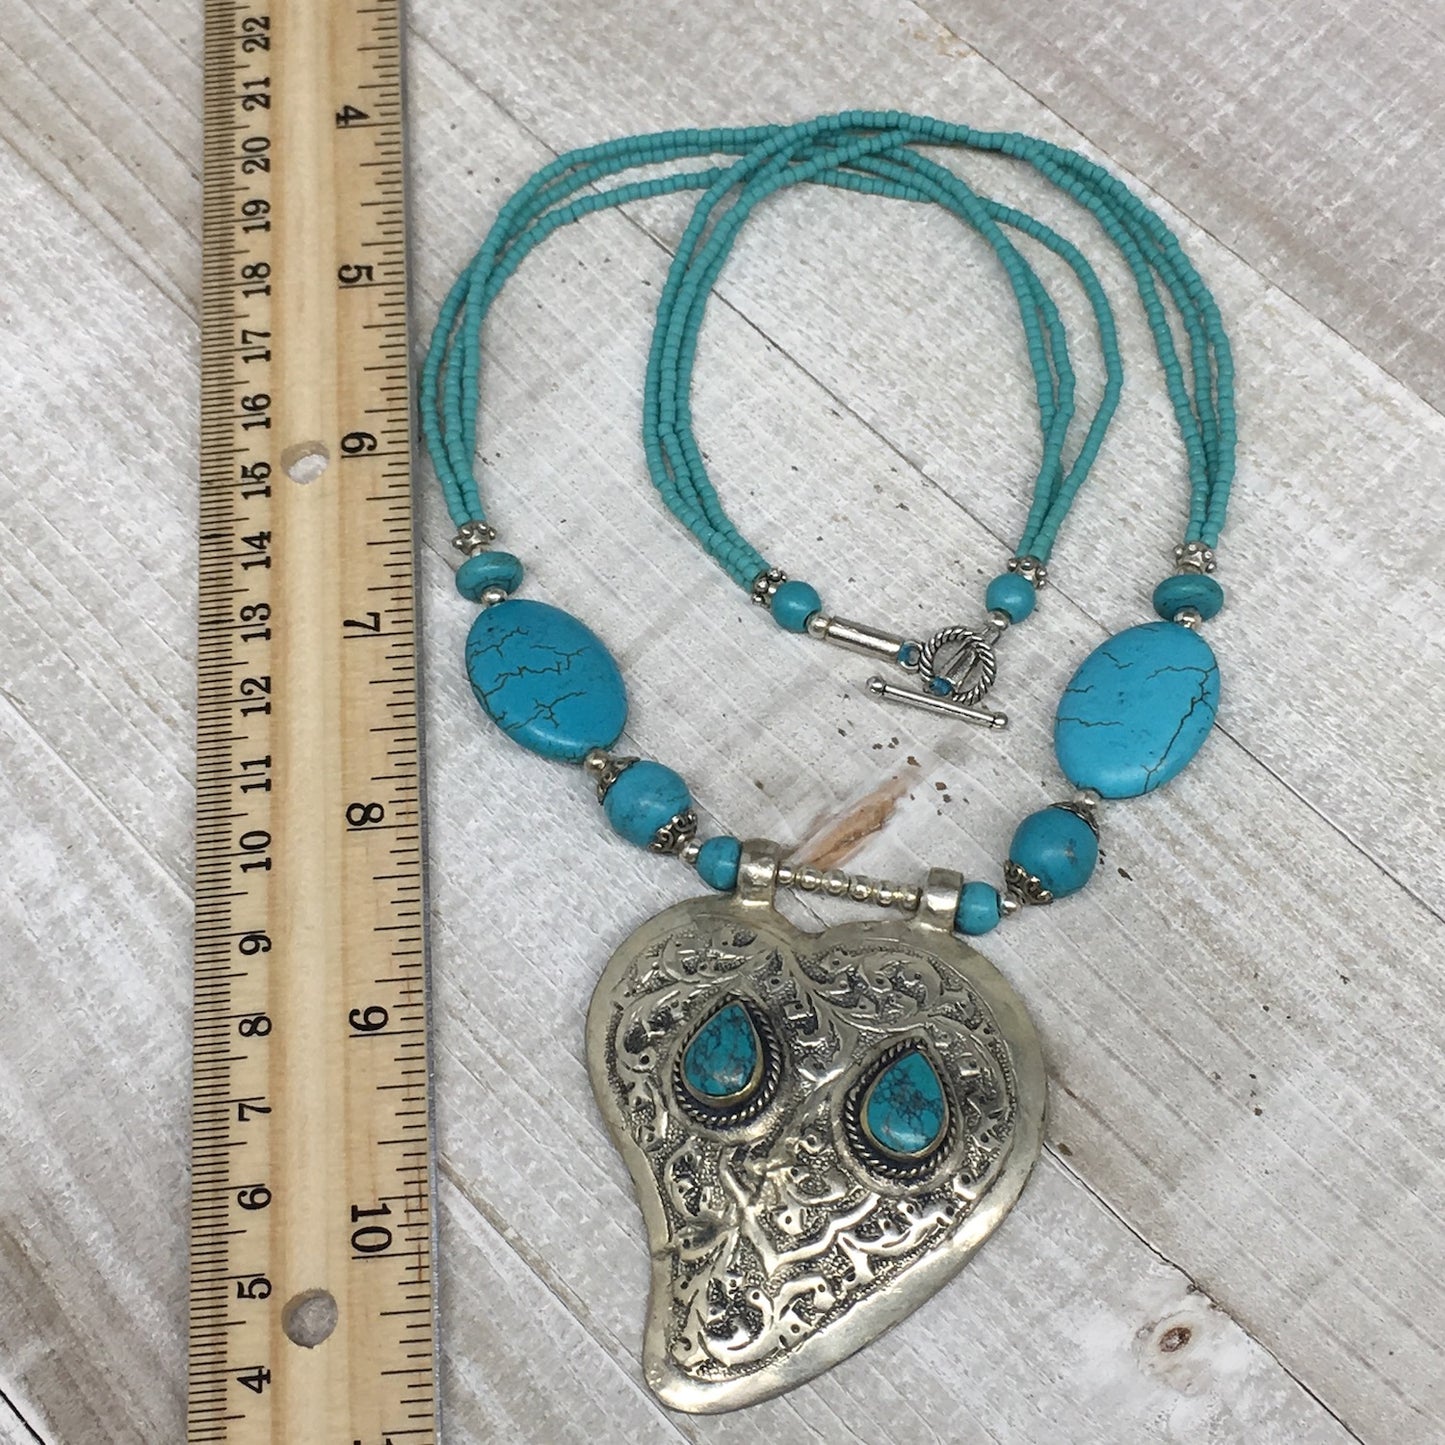 1pc,Turkmen Necklace Pendant Statement Tribal Turquoise Inlay Beaded,20-21",BN08